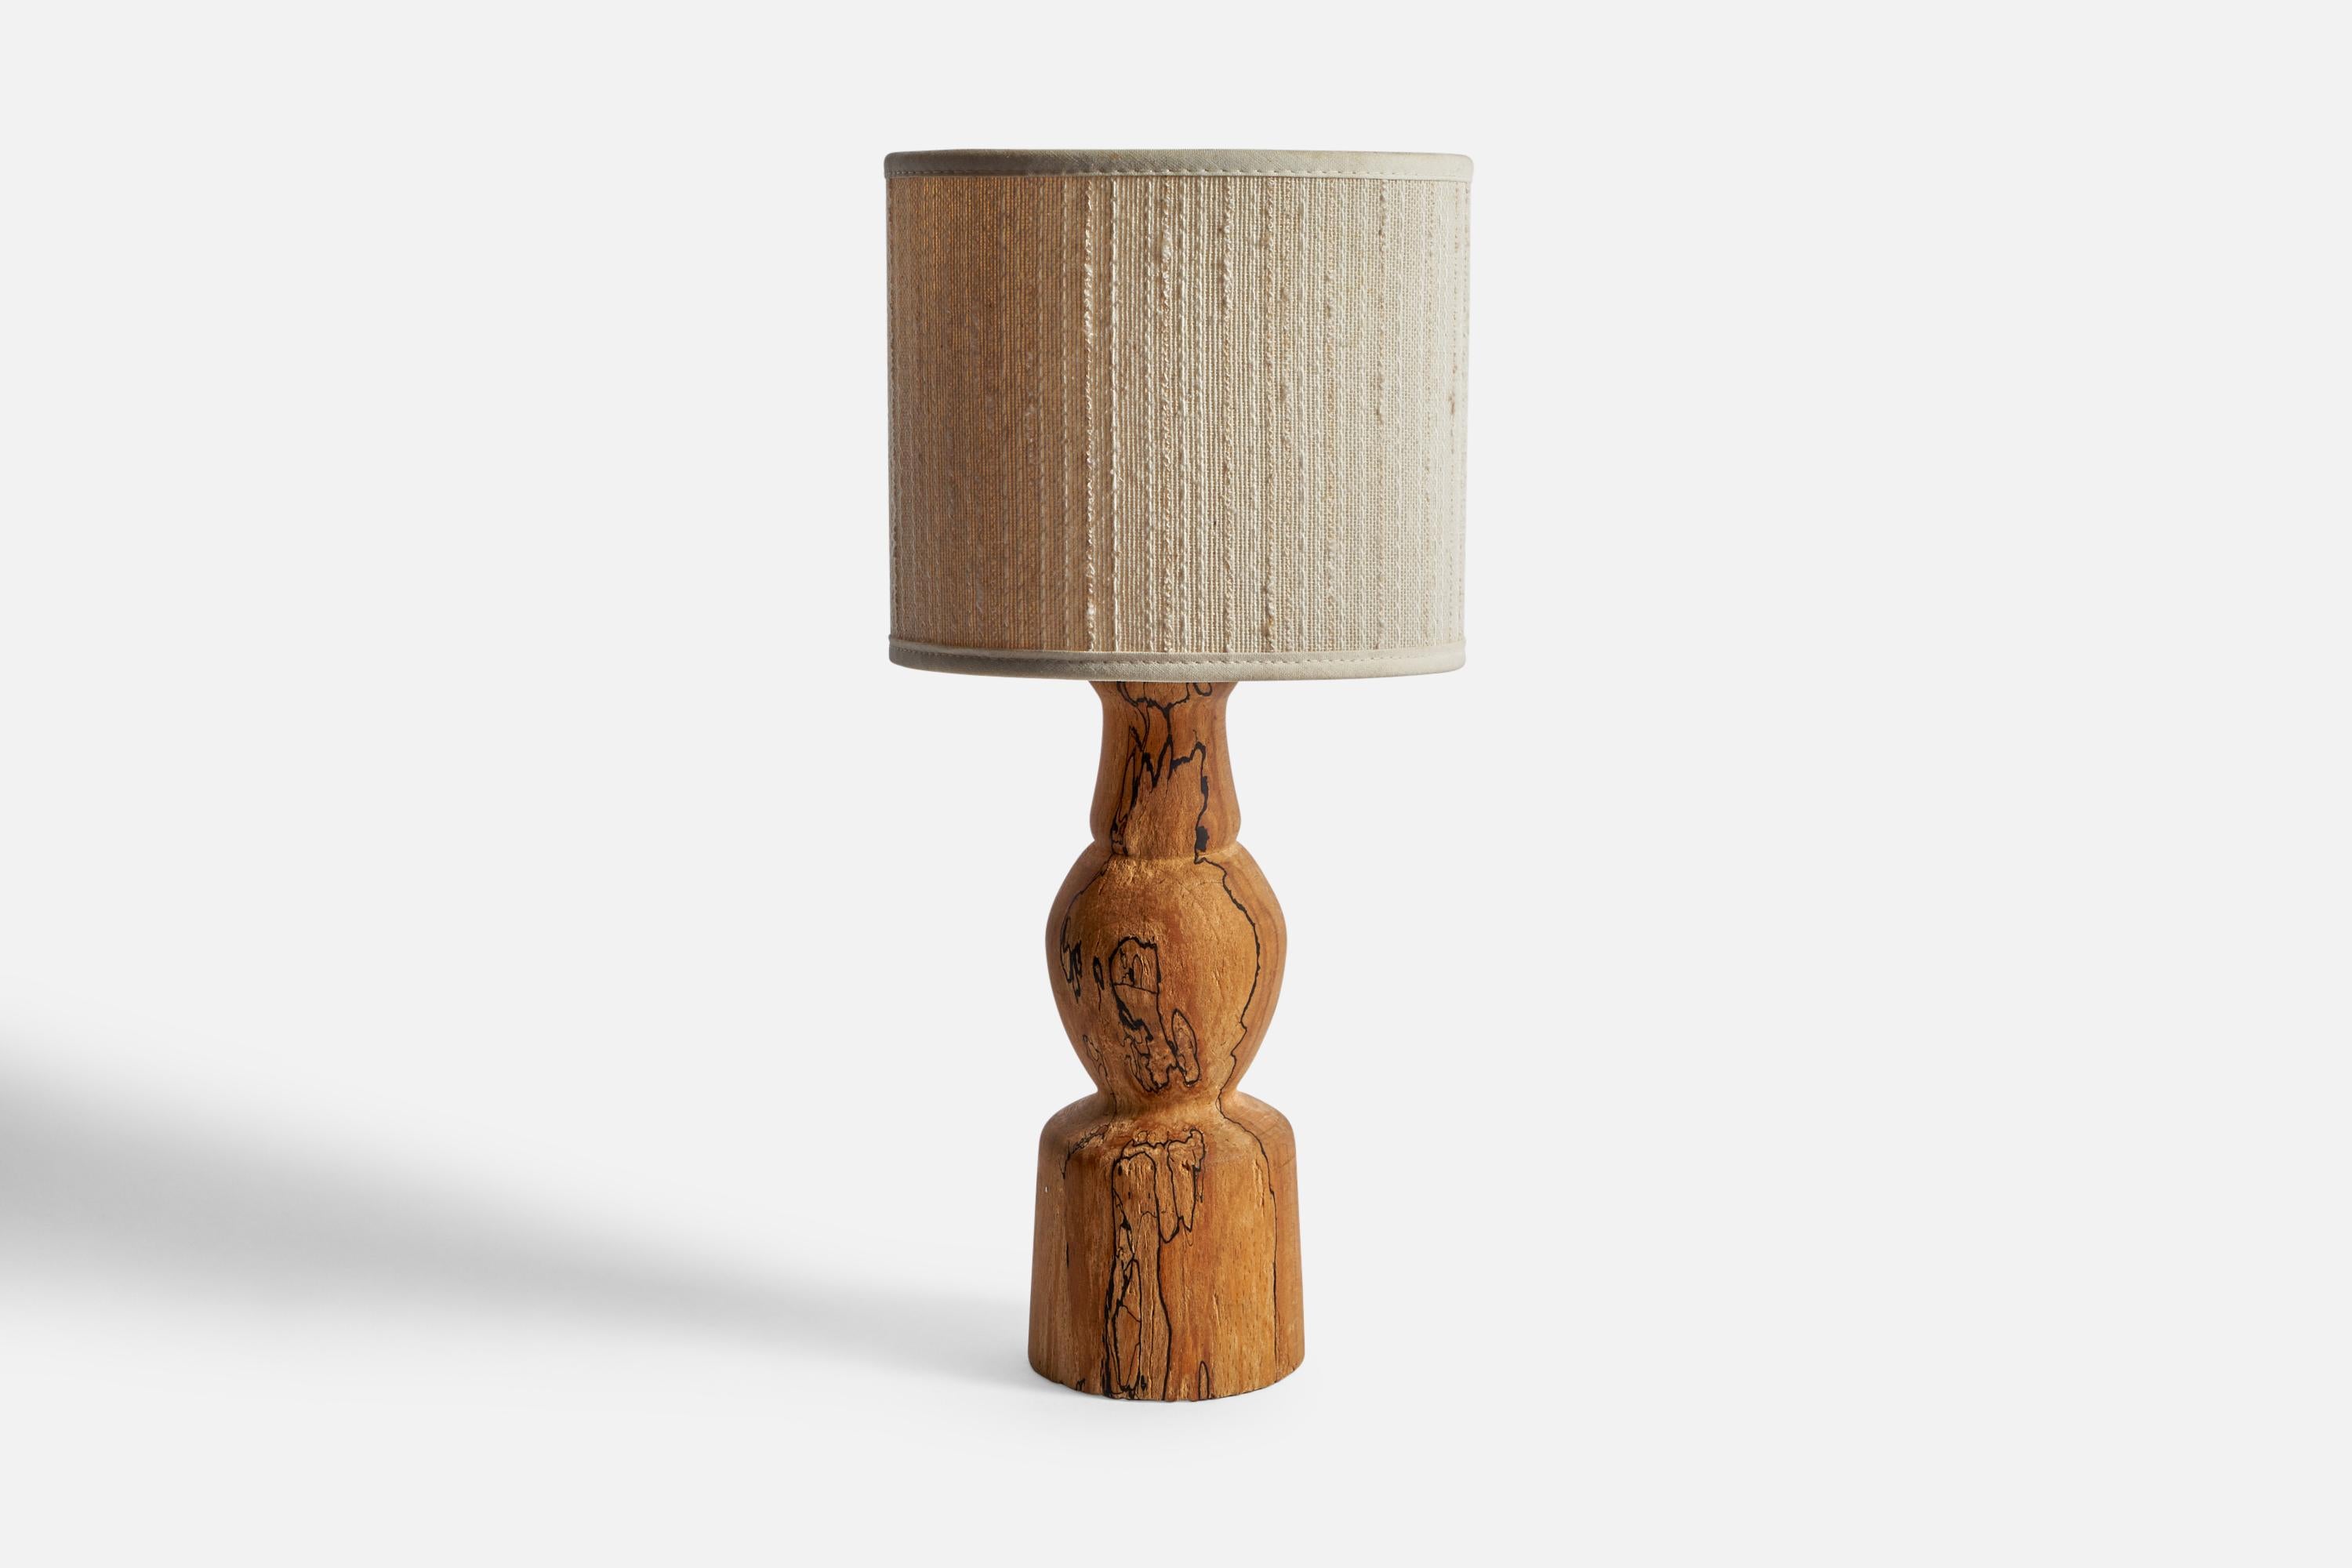 A masur birch and cream white fabric table lamp designed and produced in Sweden, c. 1970s.